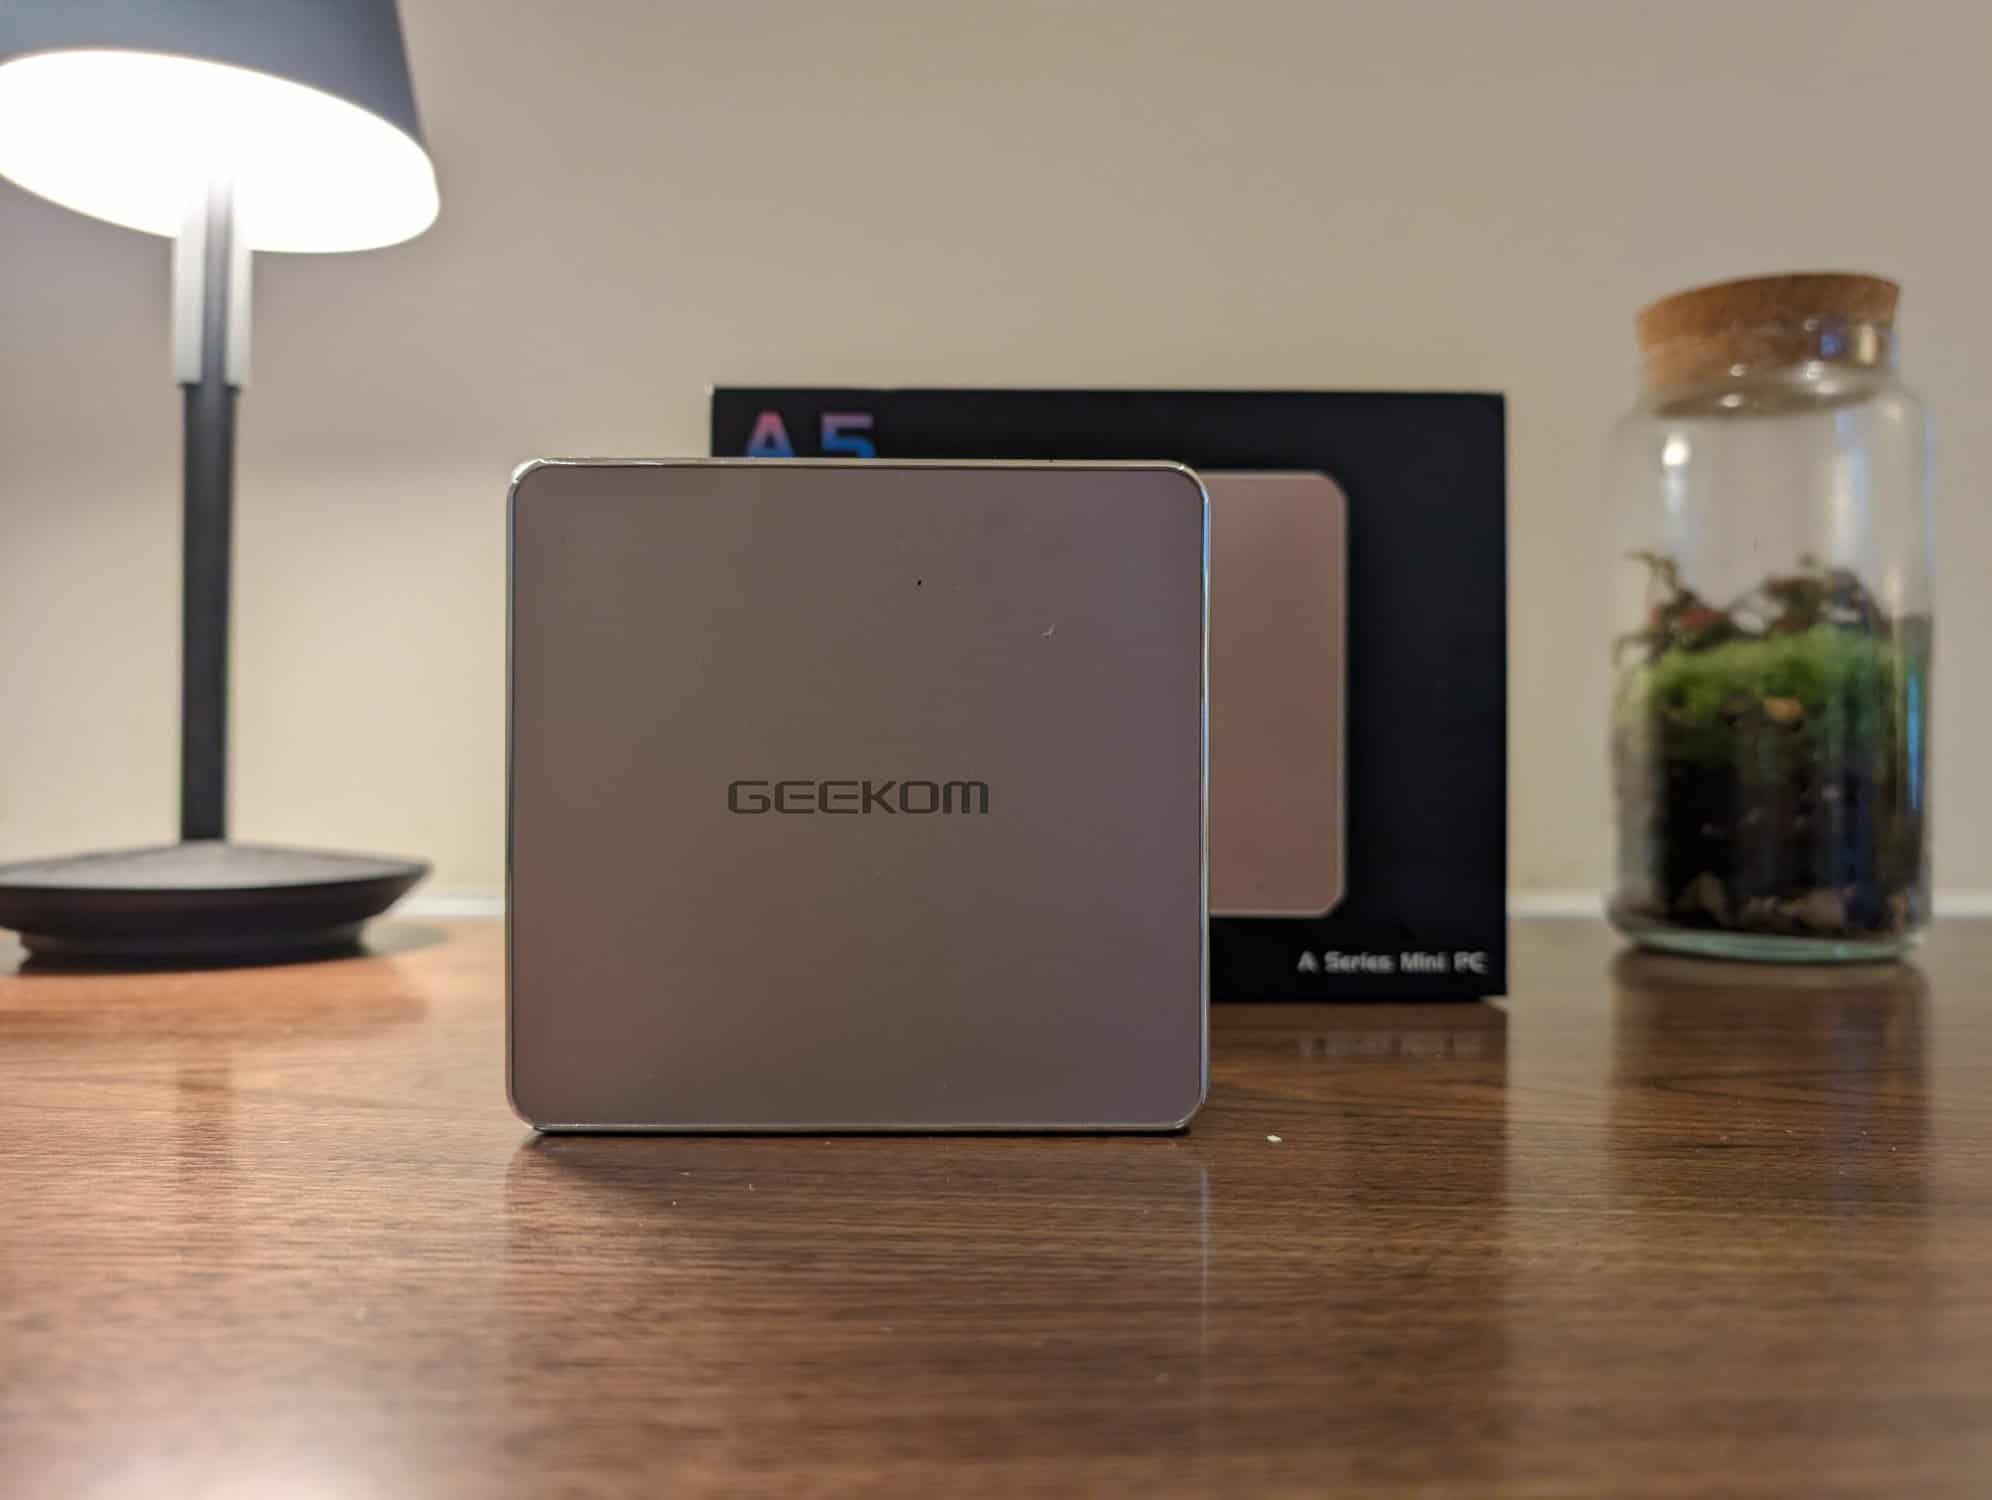 Geekom A5 Mini PC Review: An affordable NUC with AMD Ryzen 7 5800H